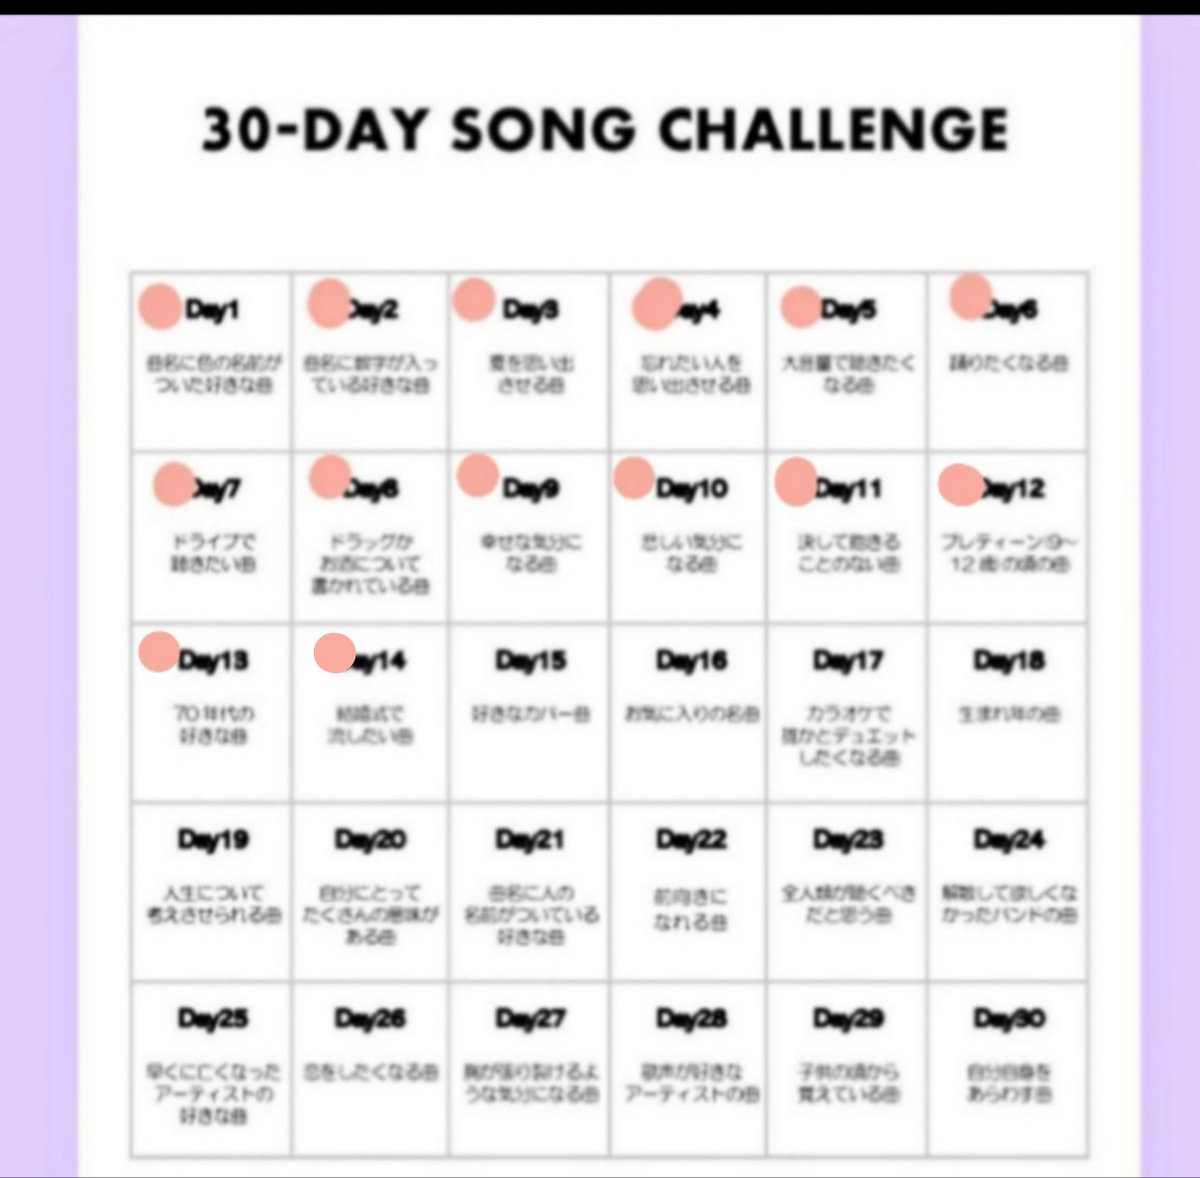 Momo Day14 結婚式で流したい曲 Beauty And The Beast Ariana Grande John Legend The Rose Westlife My Heart Will Go On Celine Dion 30daysongchallenge T Co Ith5sgrmiv